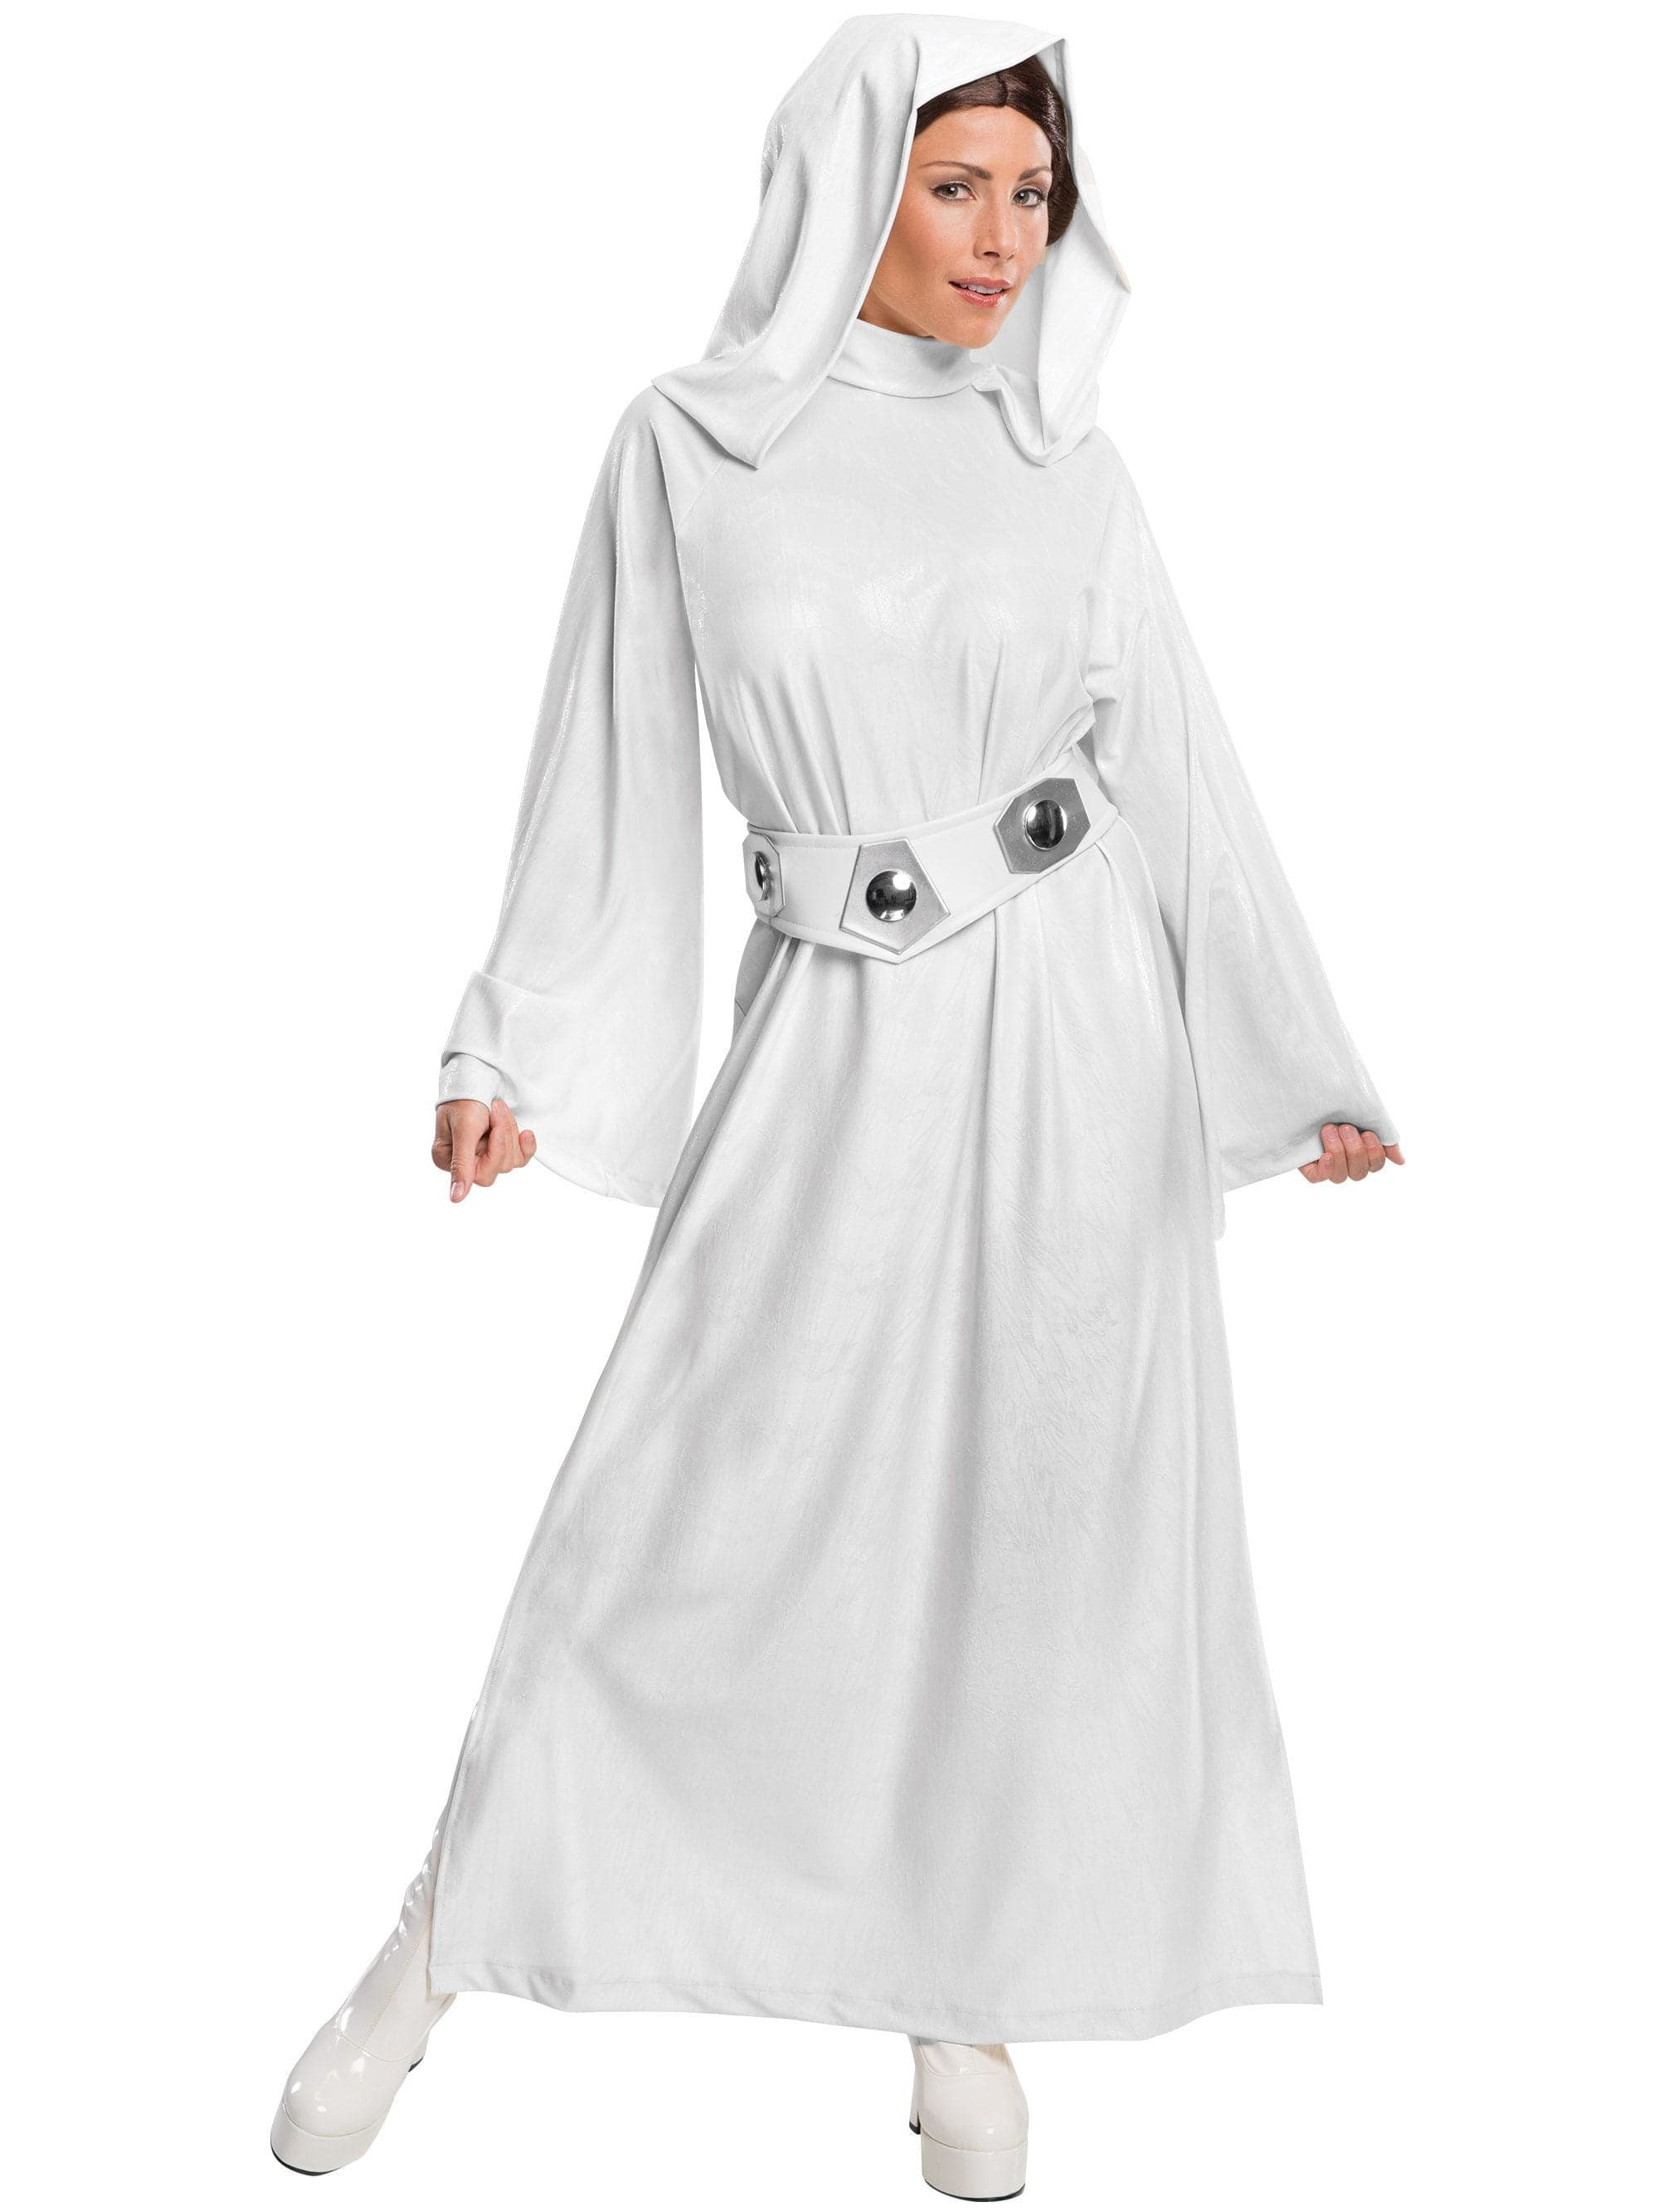 Adult Classic Star Wars Princess Leia Deluxe Costume - costumes.com